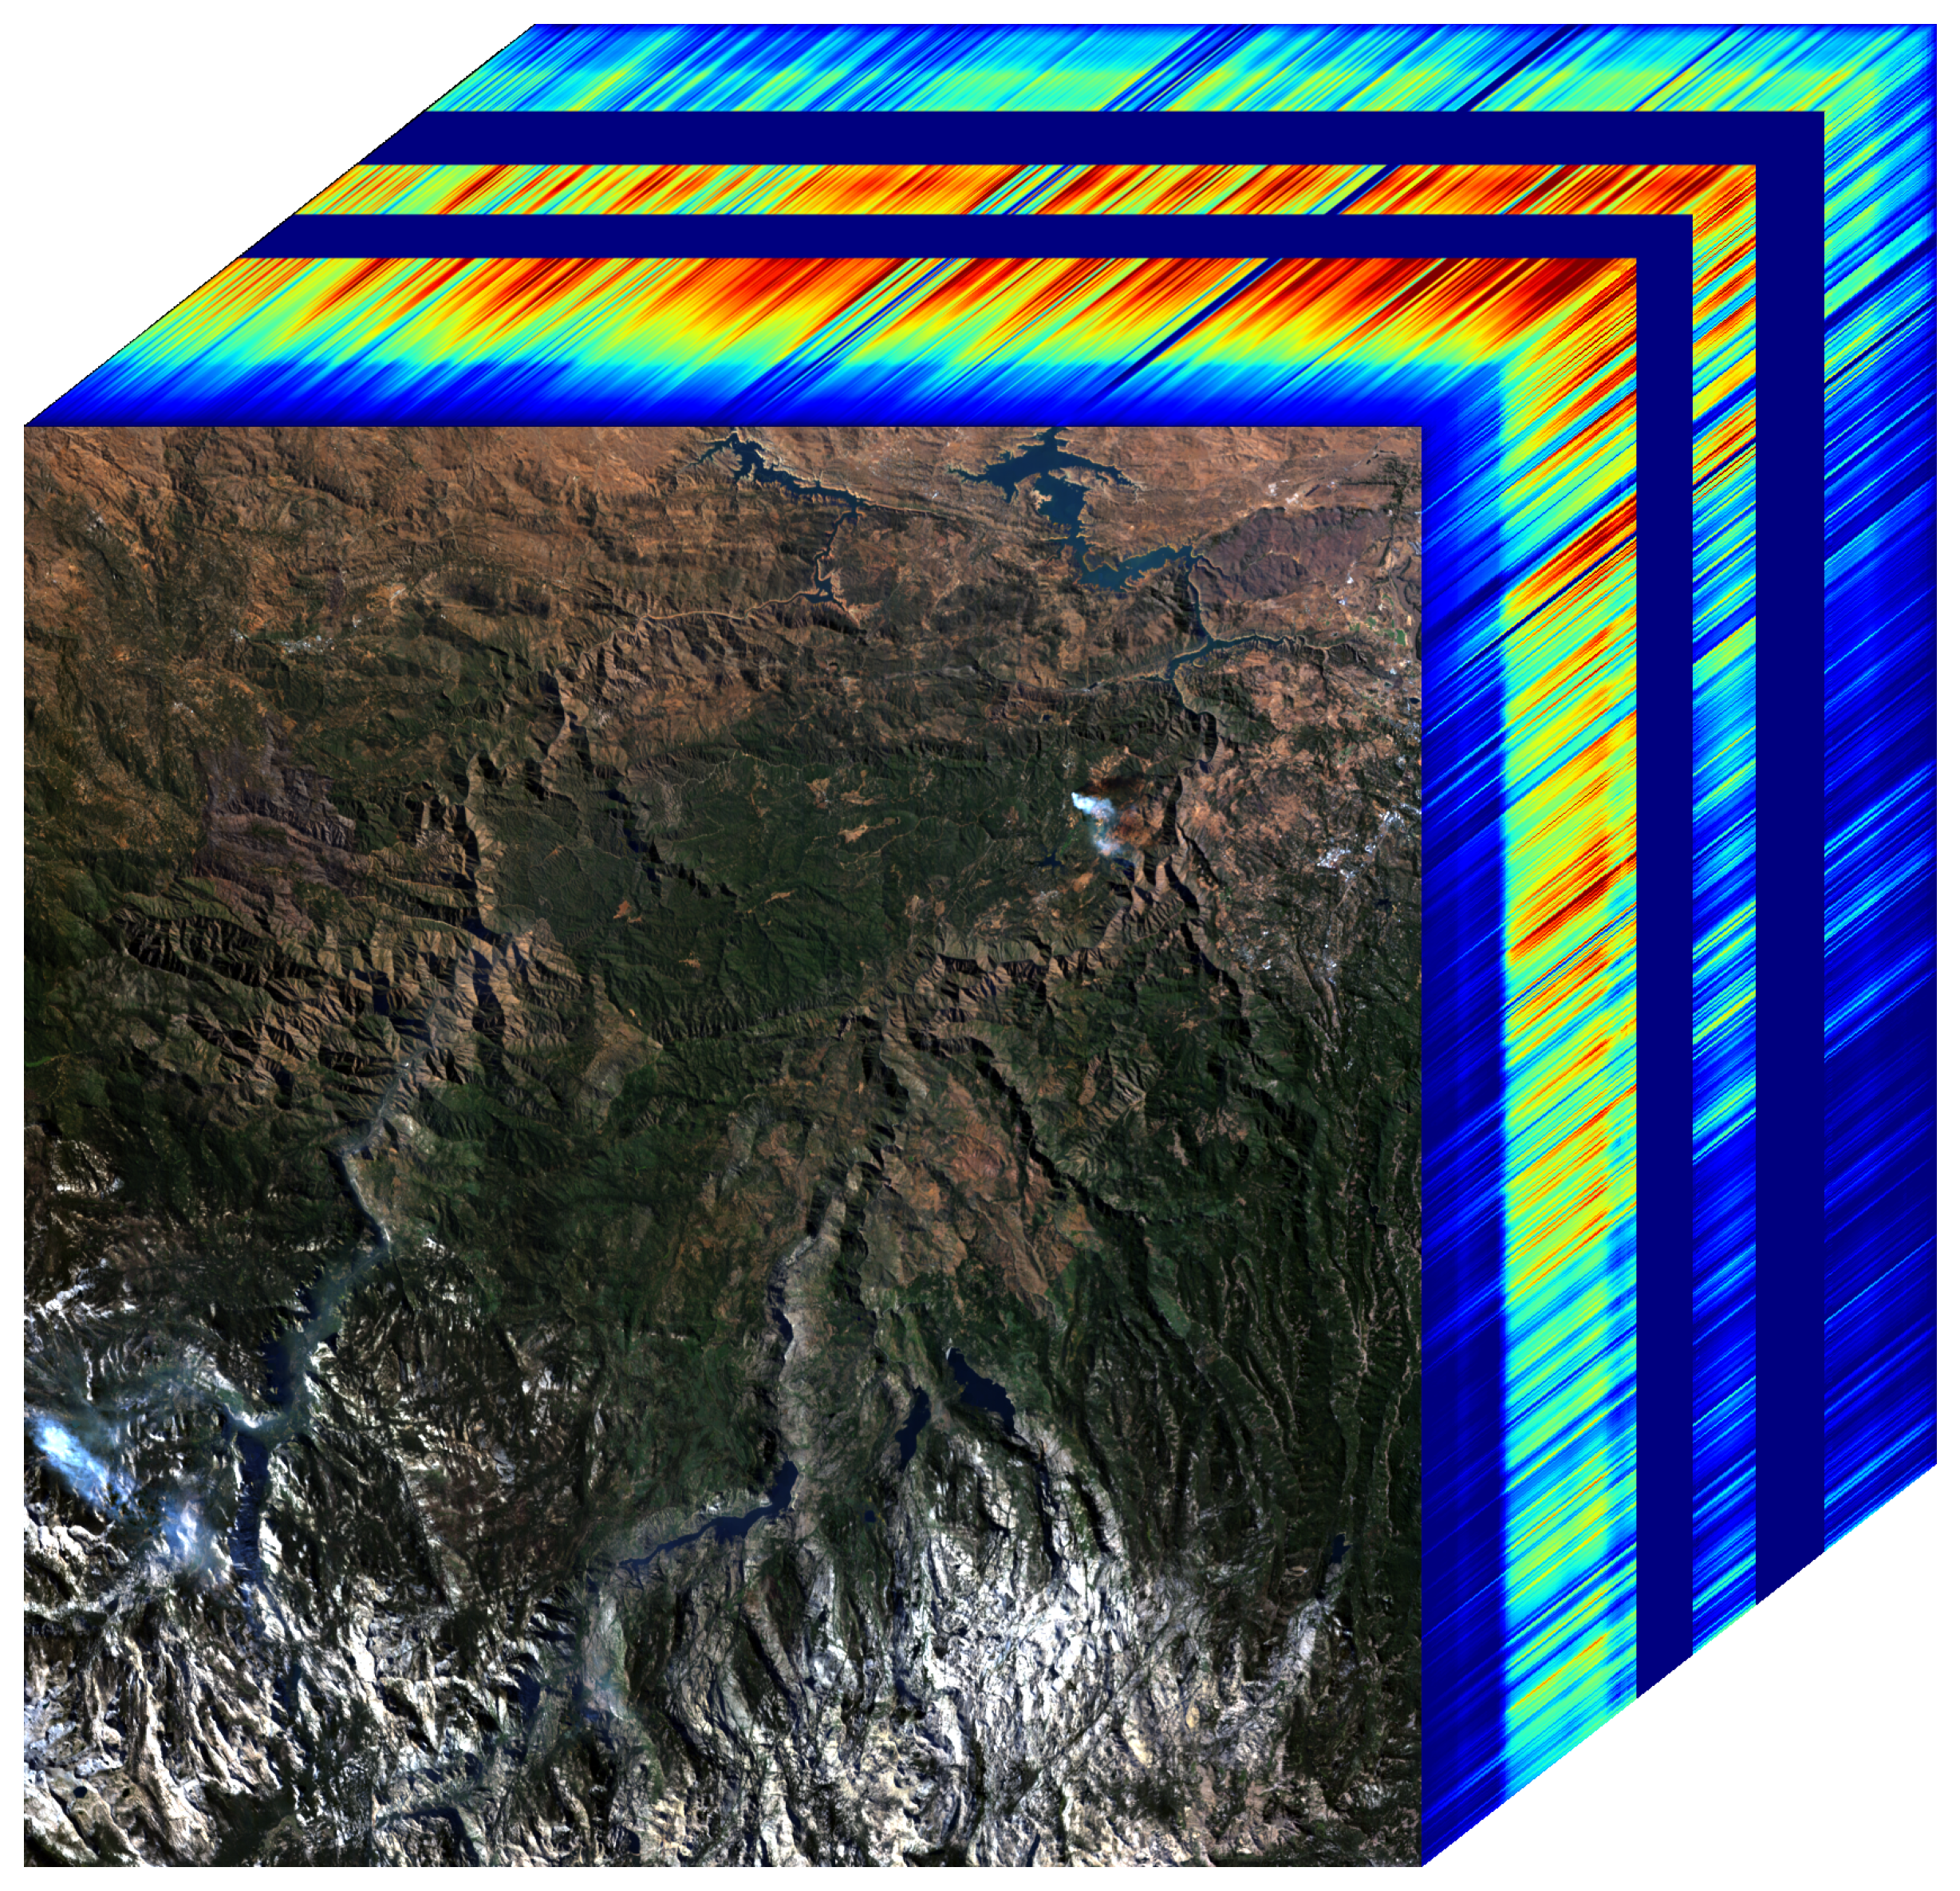 An EMIT data cube showing a fire in California